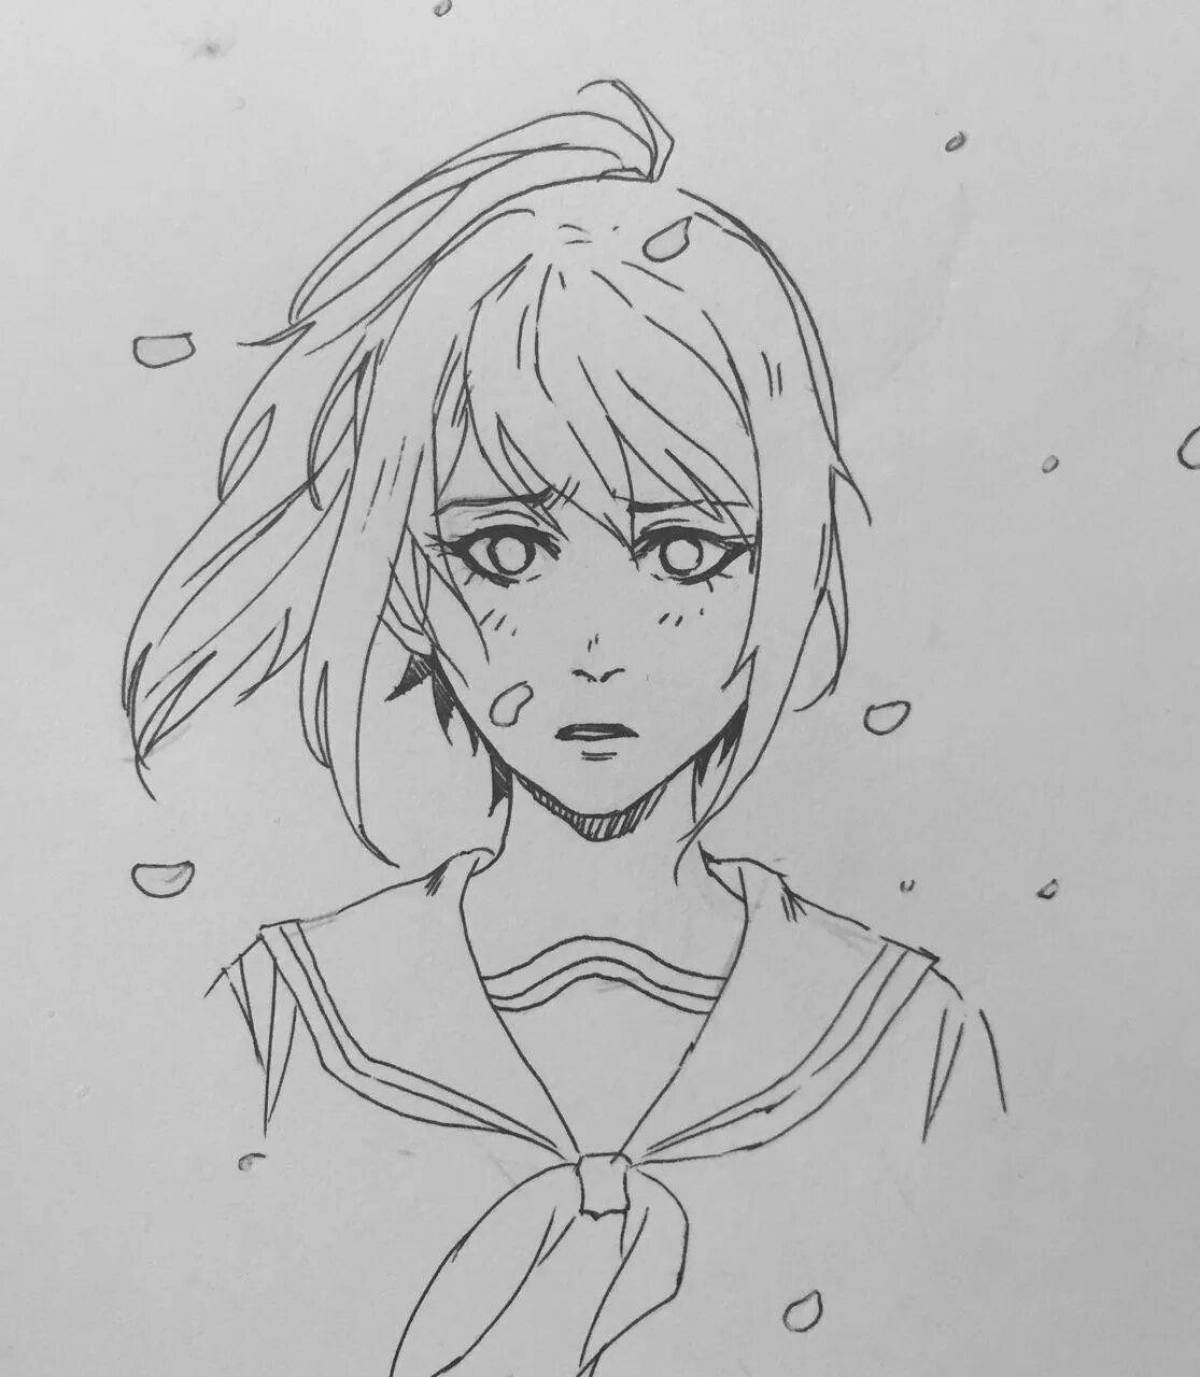 Lovely yandere simulator coloring page